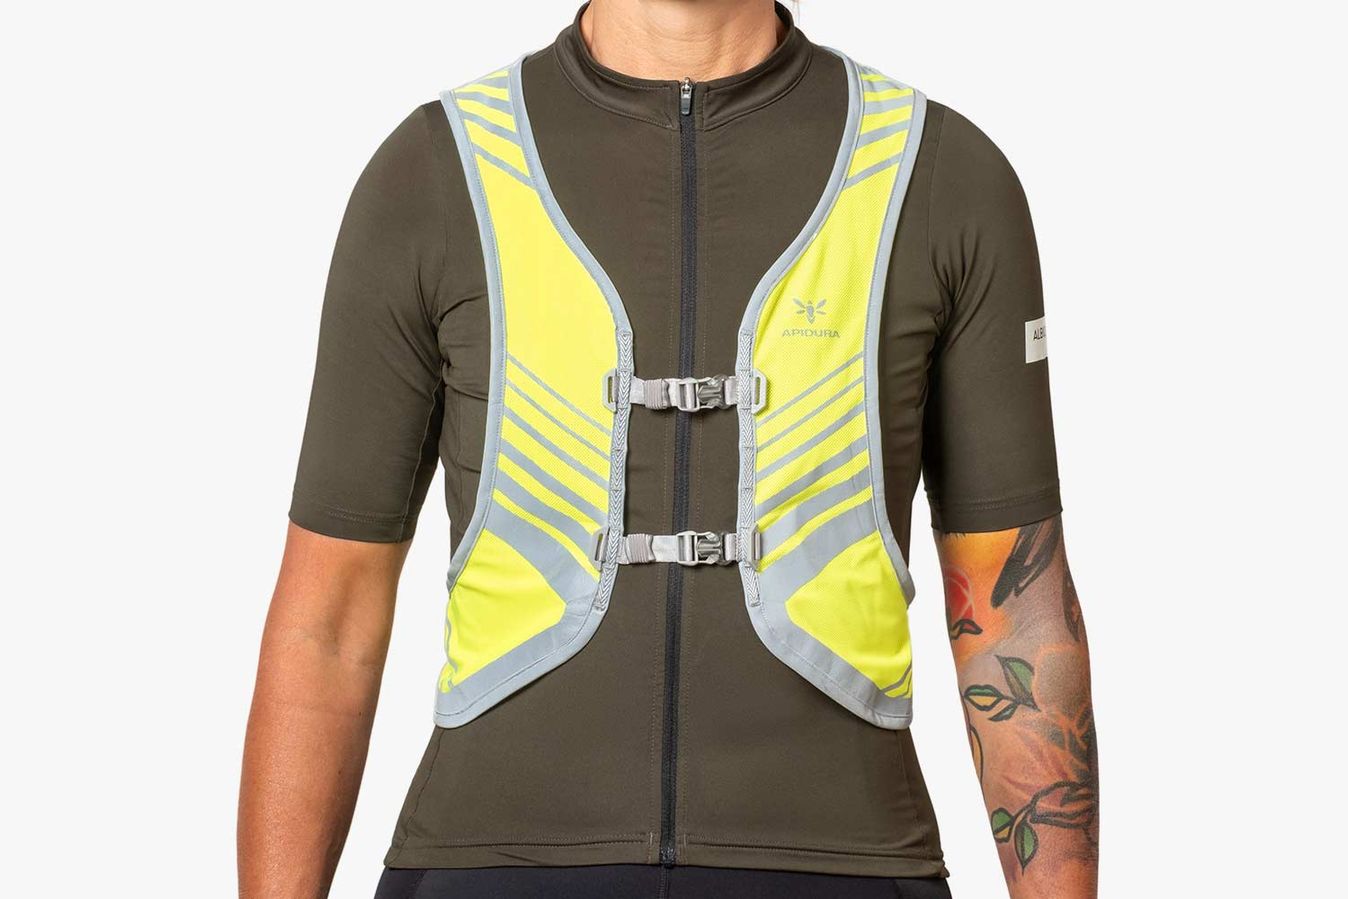 Adjustable straps allow for a bespoke fit that can accommodate being worn over a hydration vest 